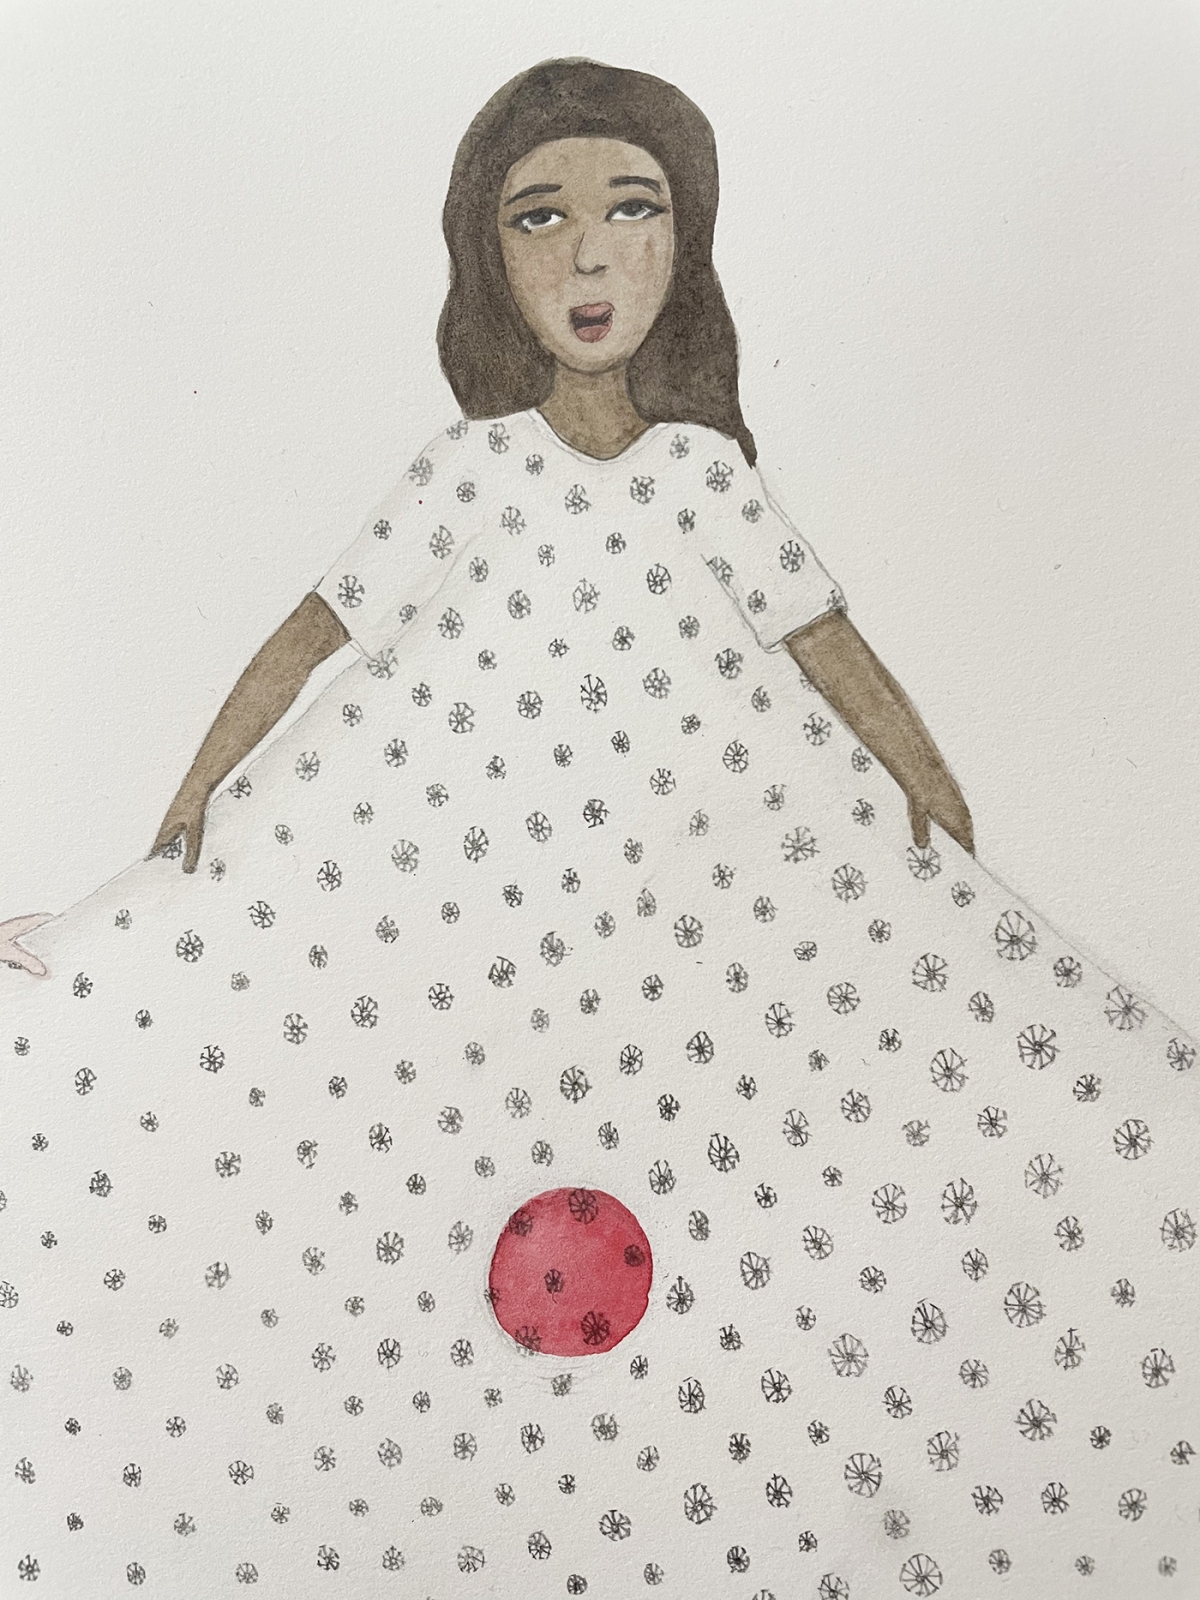 Detail of Artwork by Kyung Jeon titled Safety Net Hospital Gown, 2021, Watercolor & graphite on paper, 16 x 12 inches, 40.6 x 30.5 cm